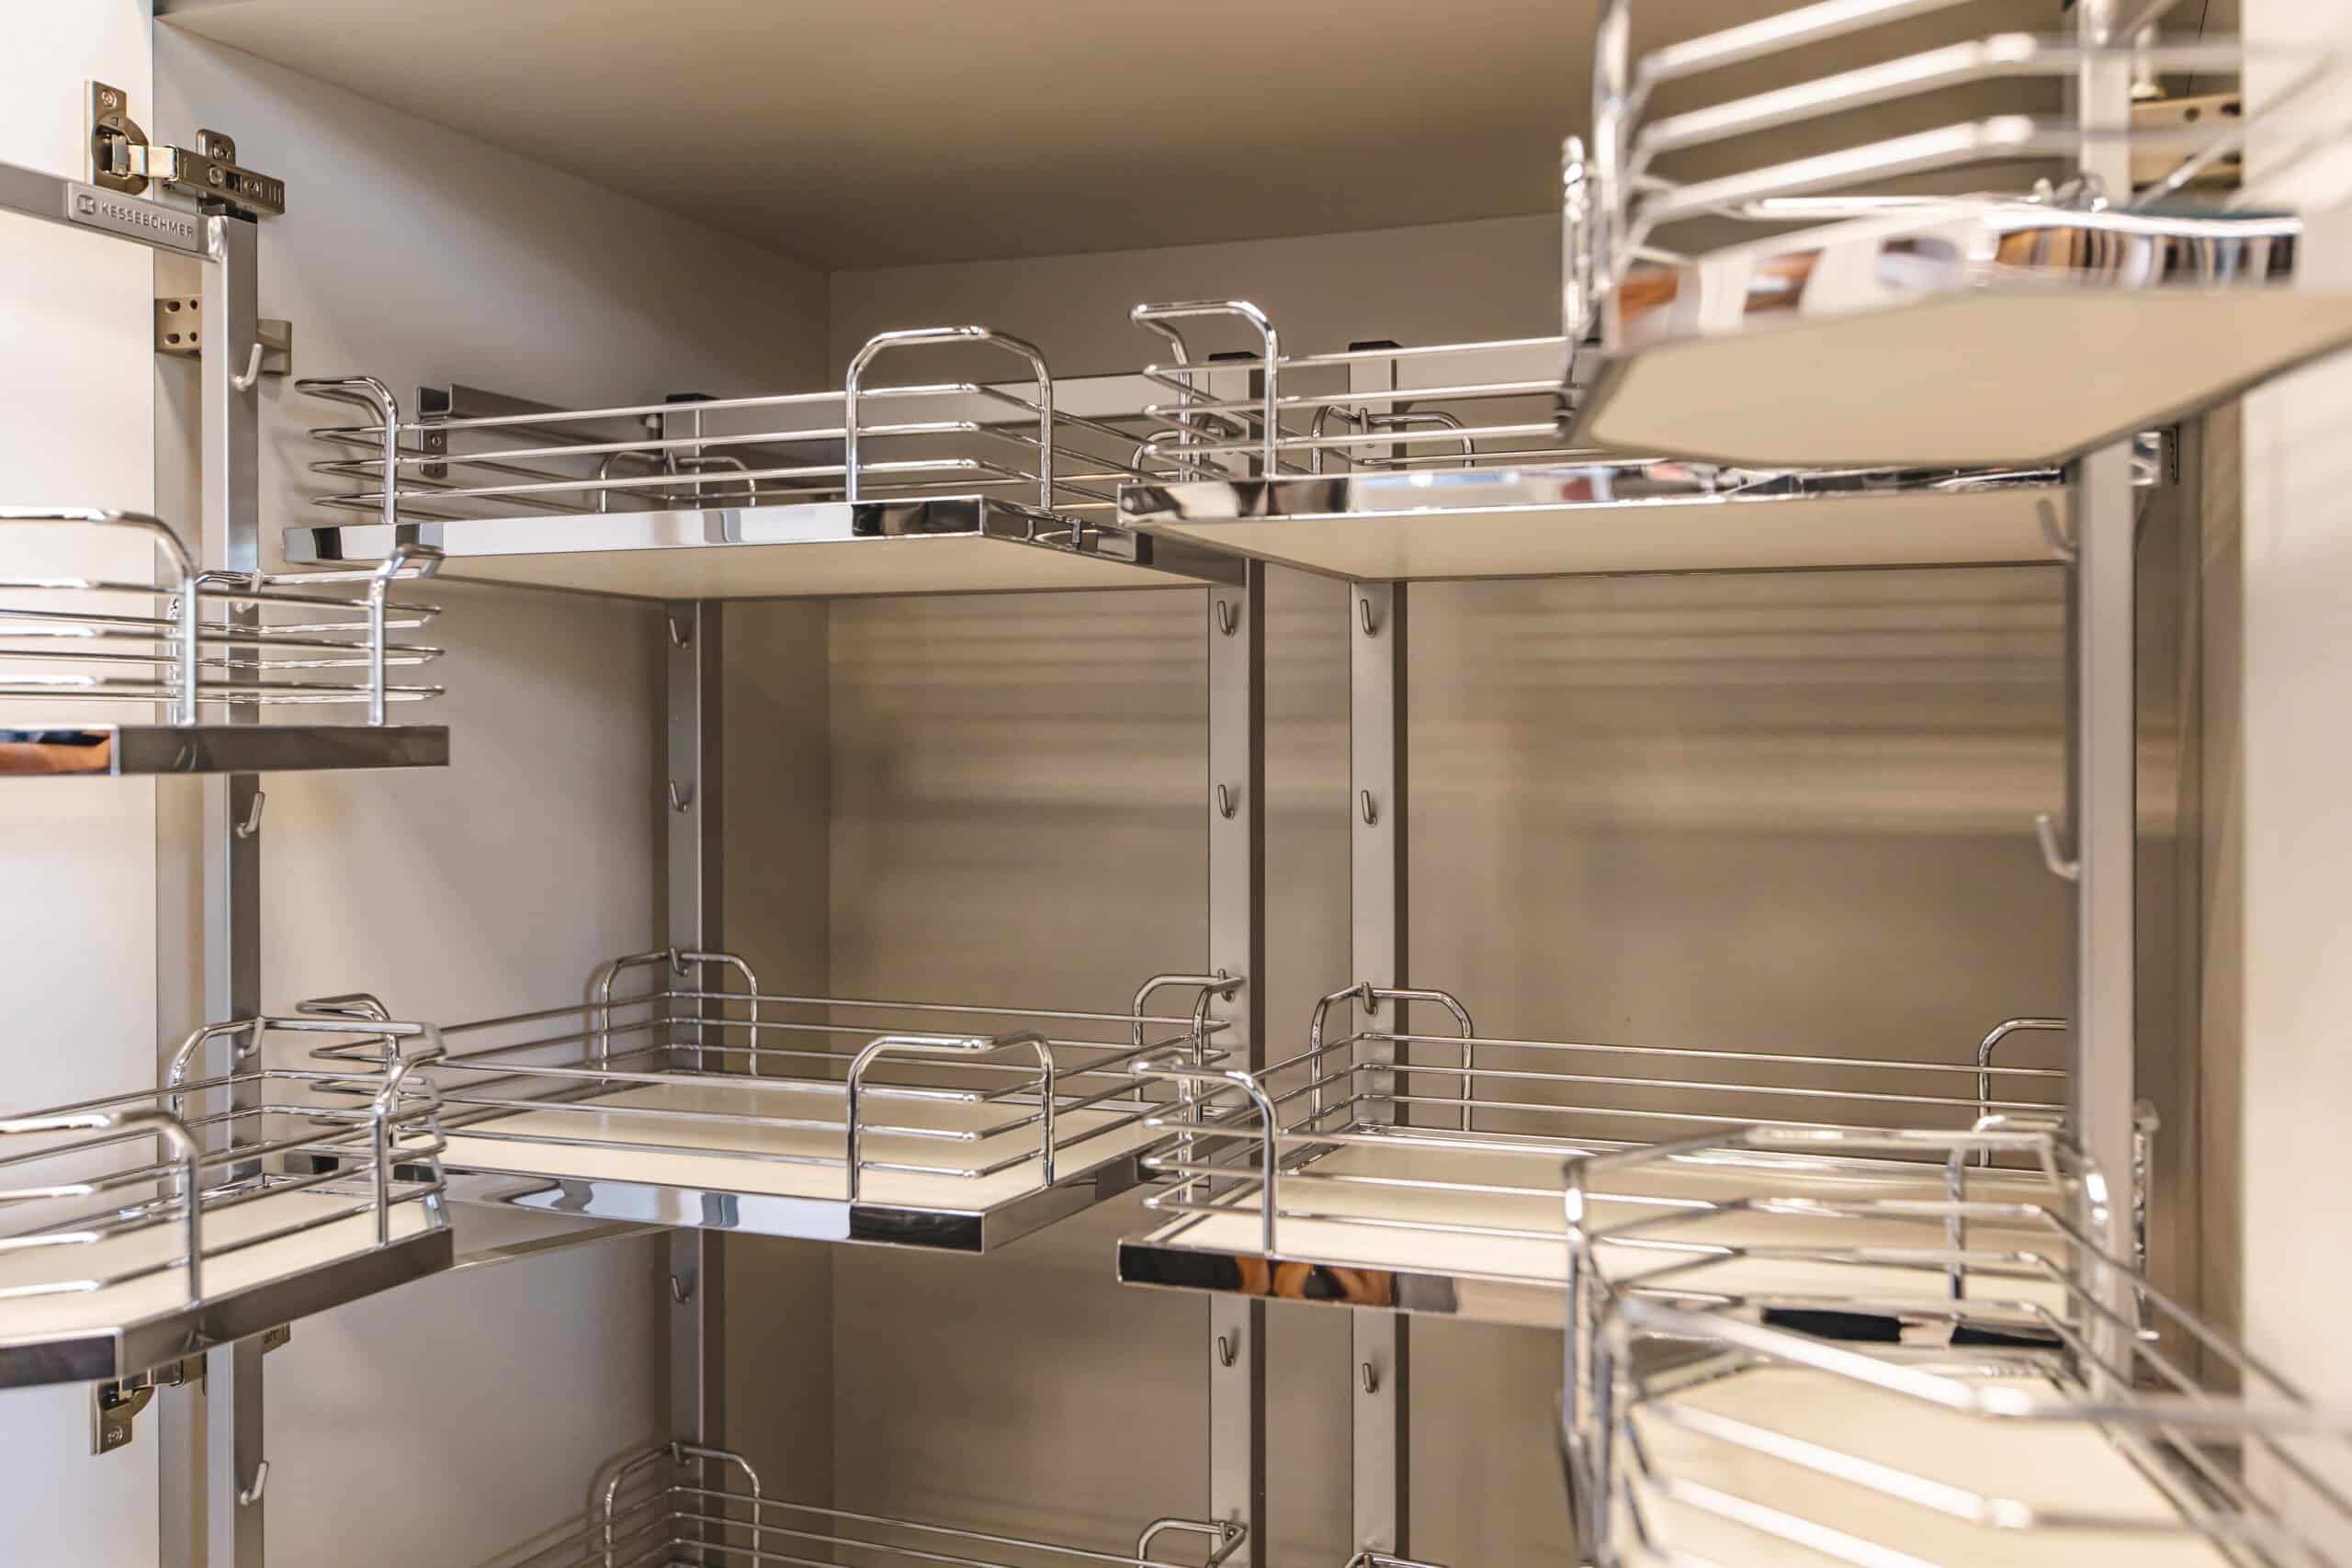 spacious kitchen pantry filled with shelves to accommodate various items